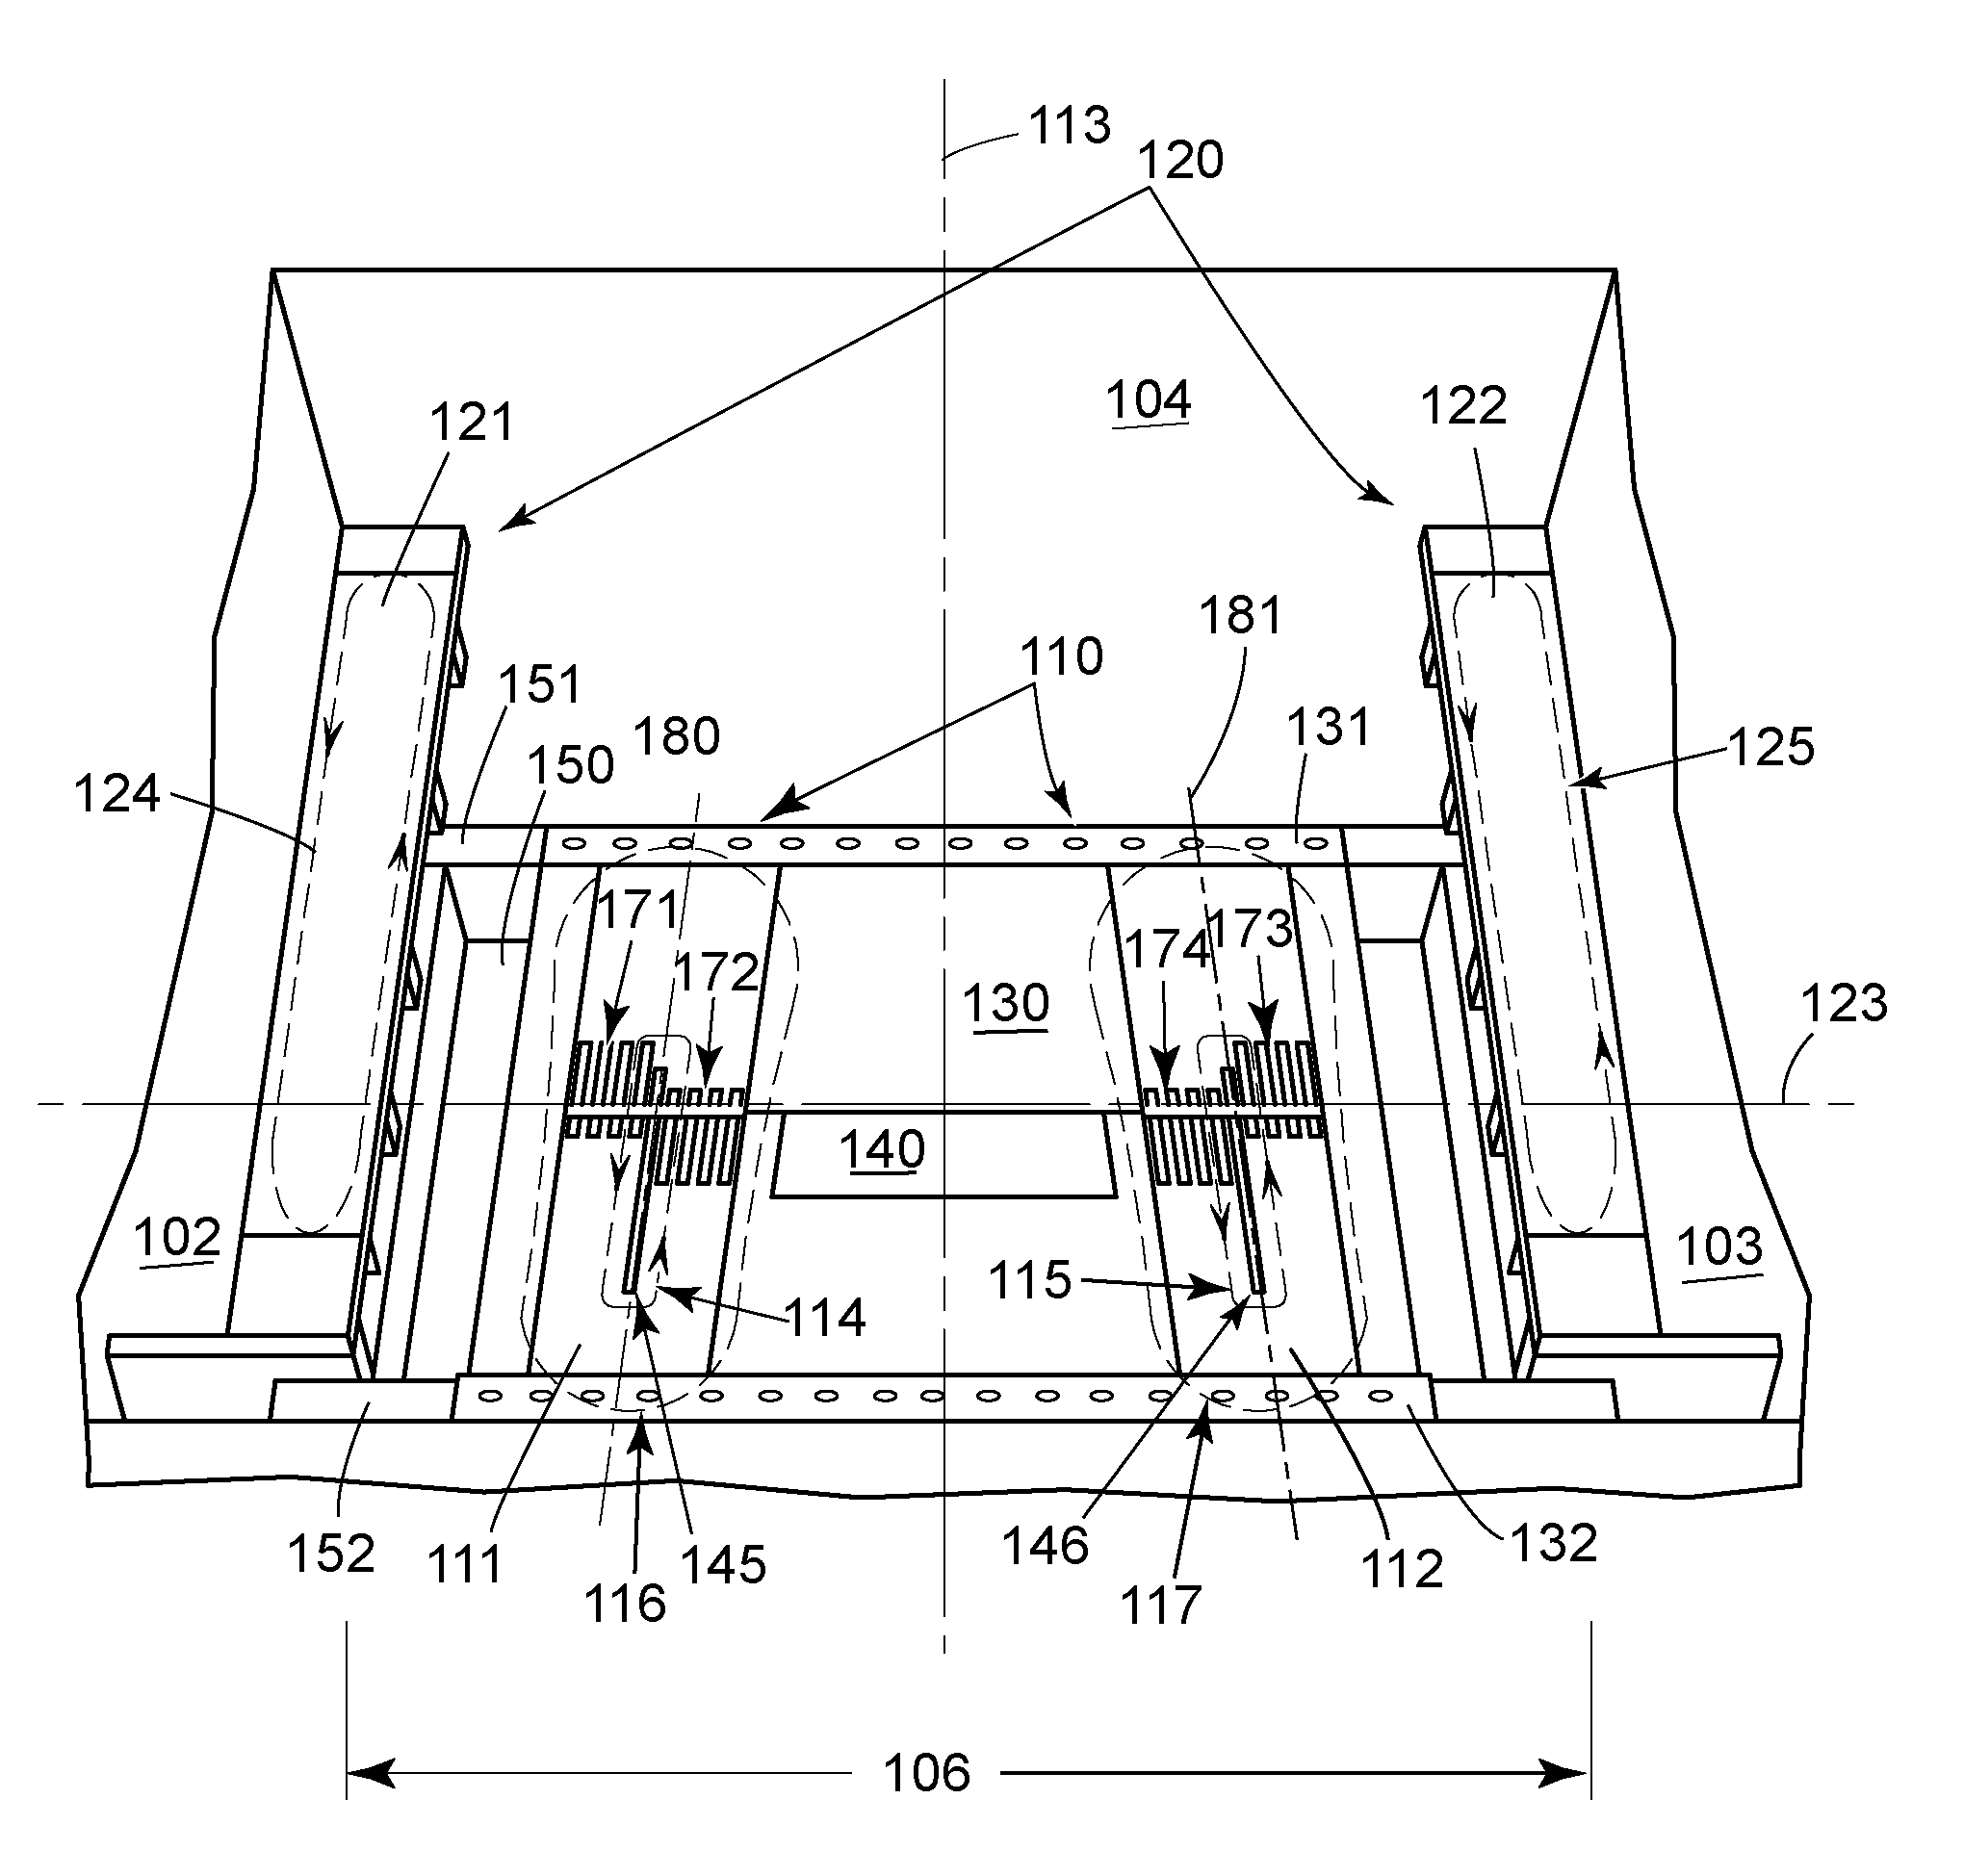 Apparatus and method for non-symmetric magnetic field balancing in an inspection scanner